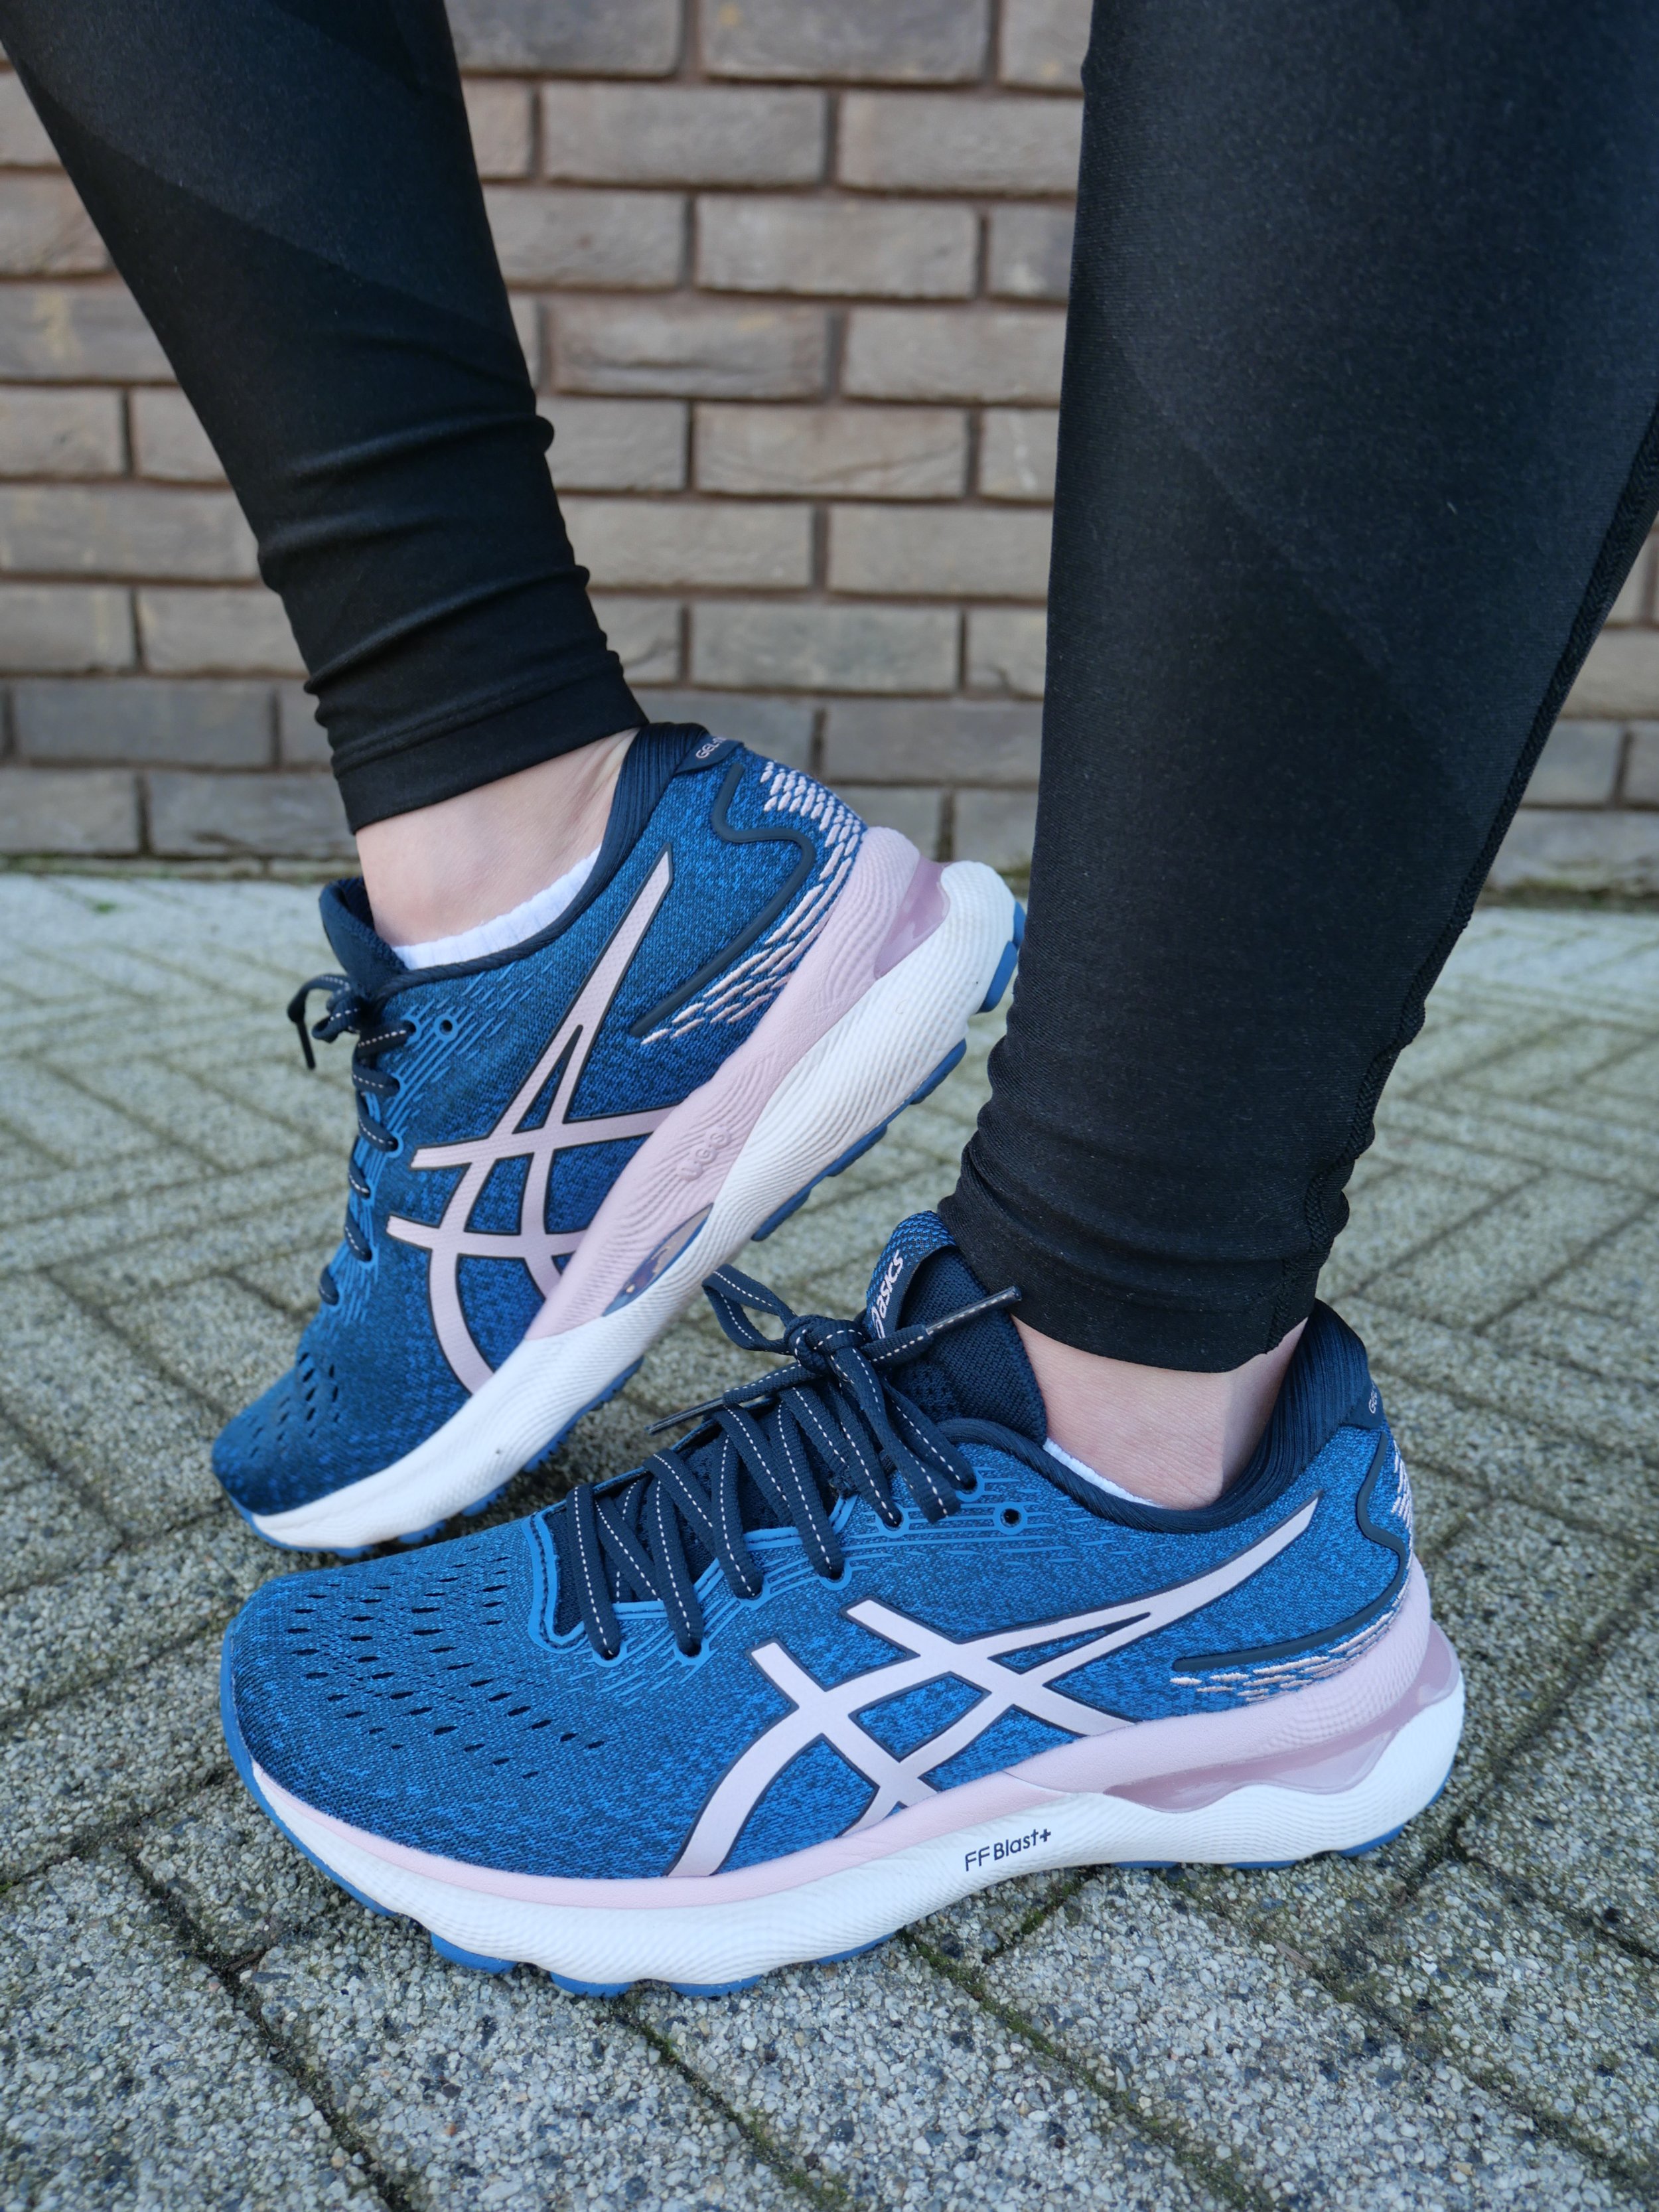 ASICS Gel Nimbus 24 review (unsponsored) after 50 miles